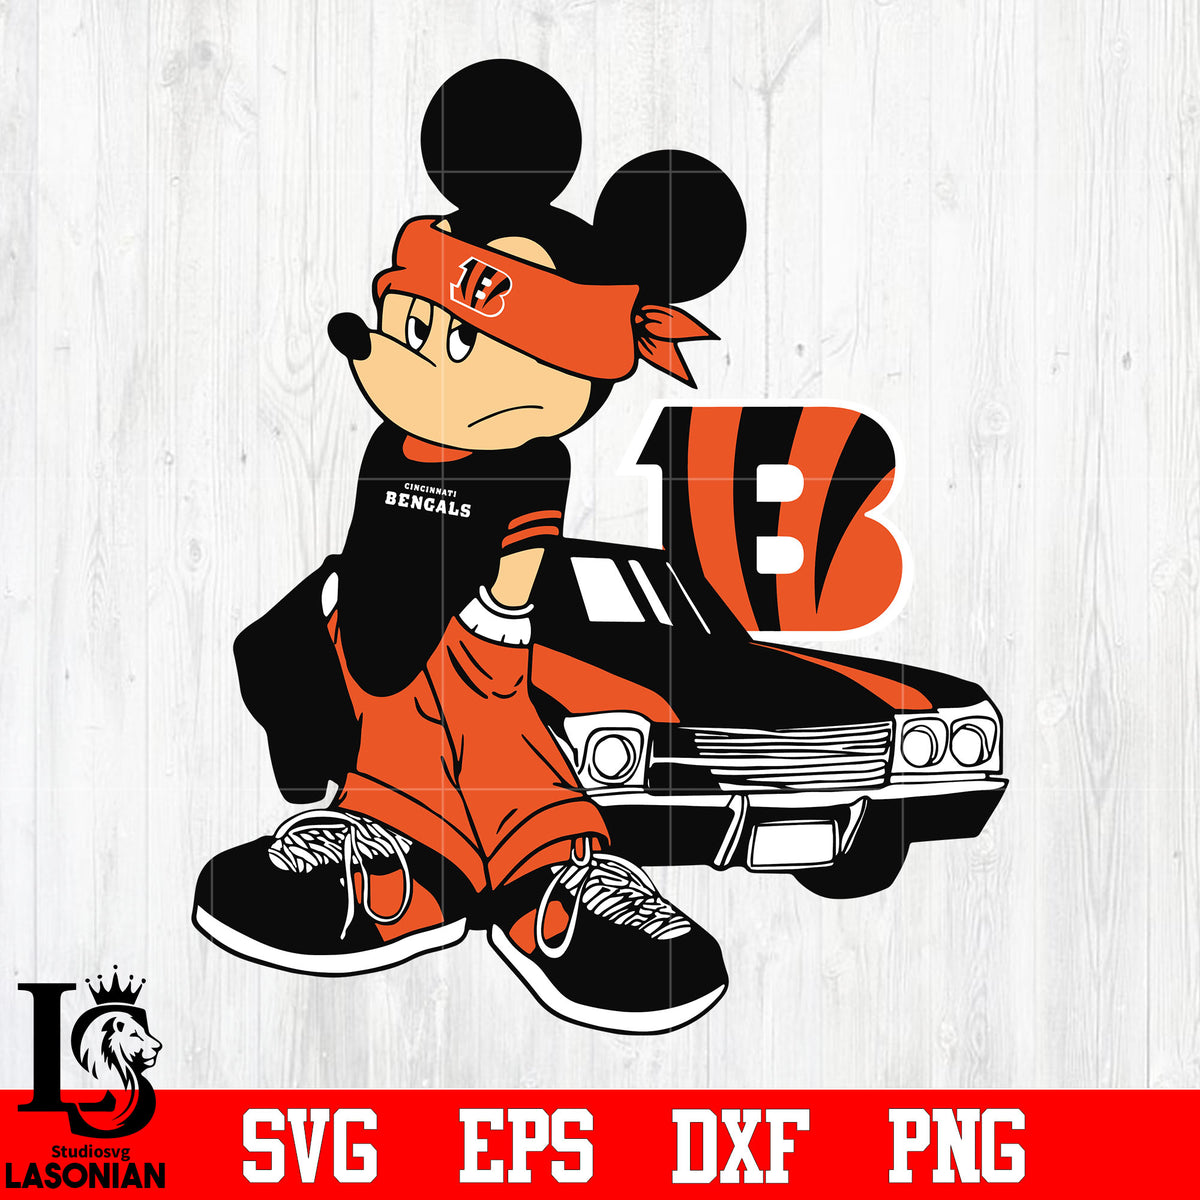 bengals mickey mouse shirt